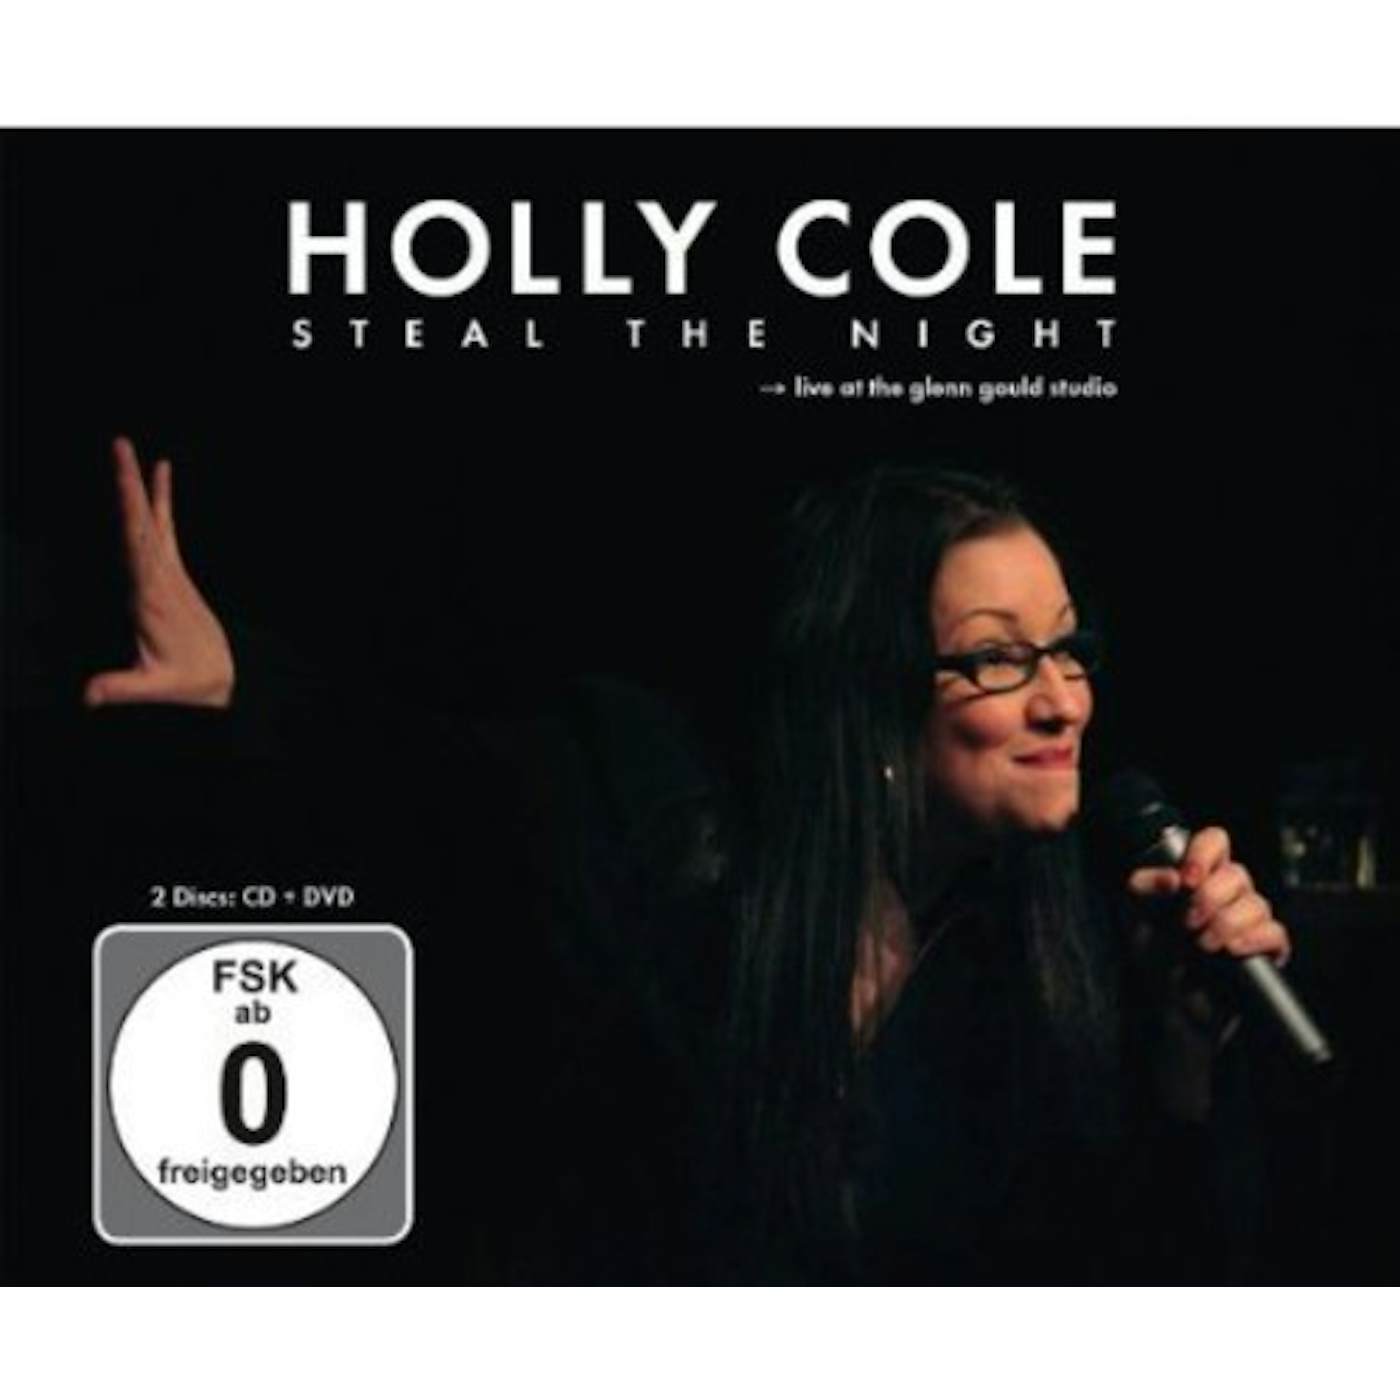 Holly Cole STEAL THE NIGHT: LIVE AT THE GLENN GOULD STUDIO CD